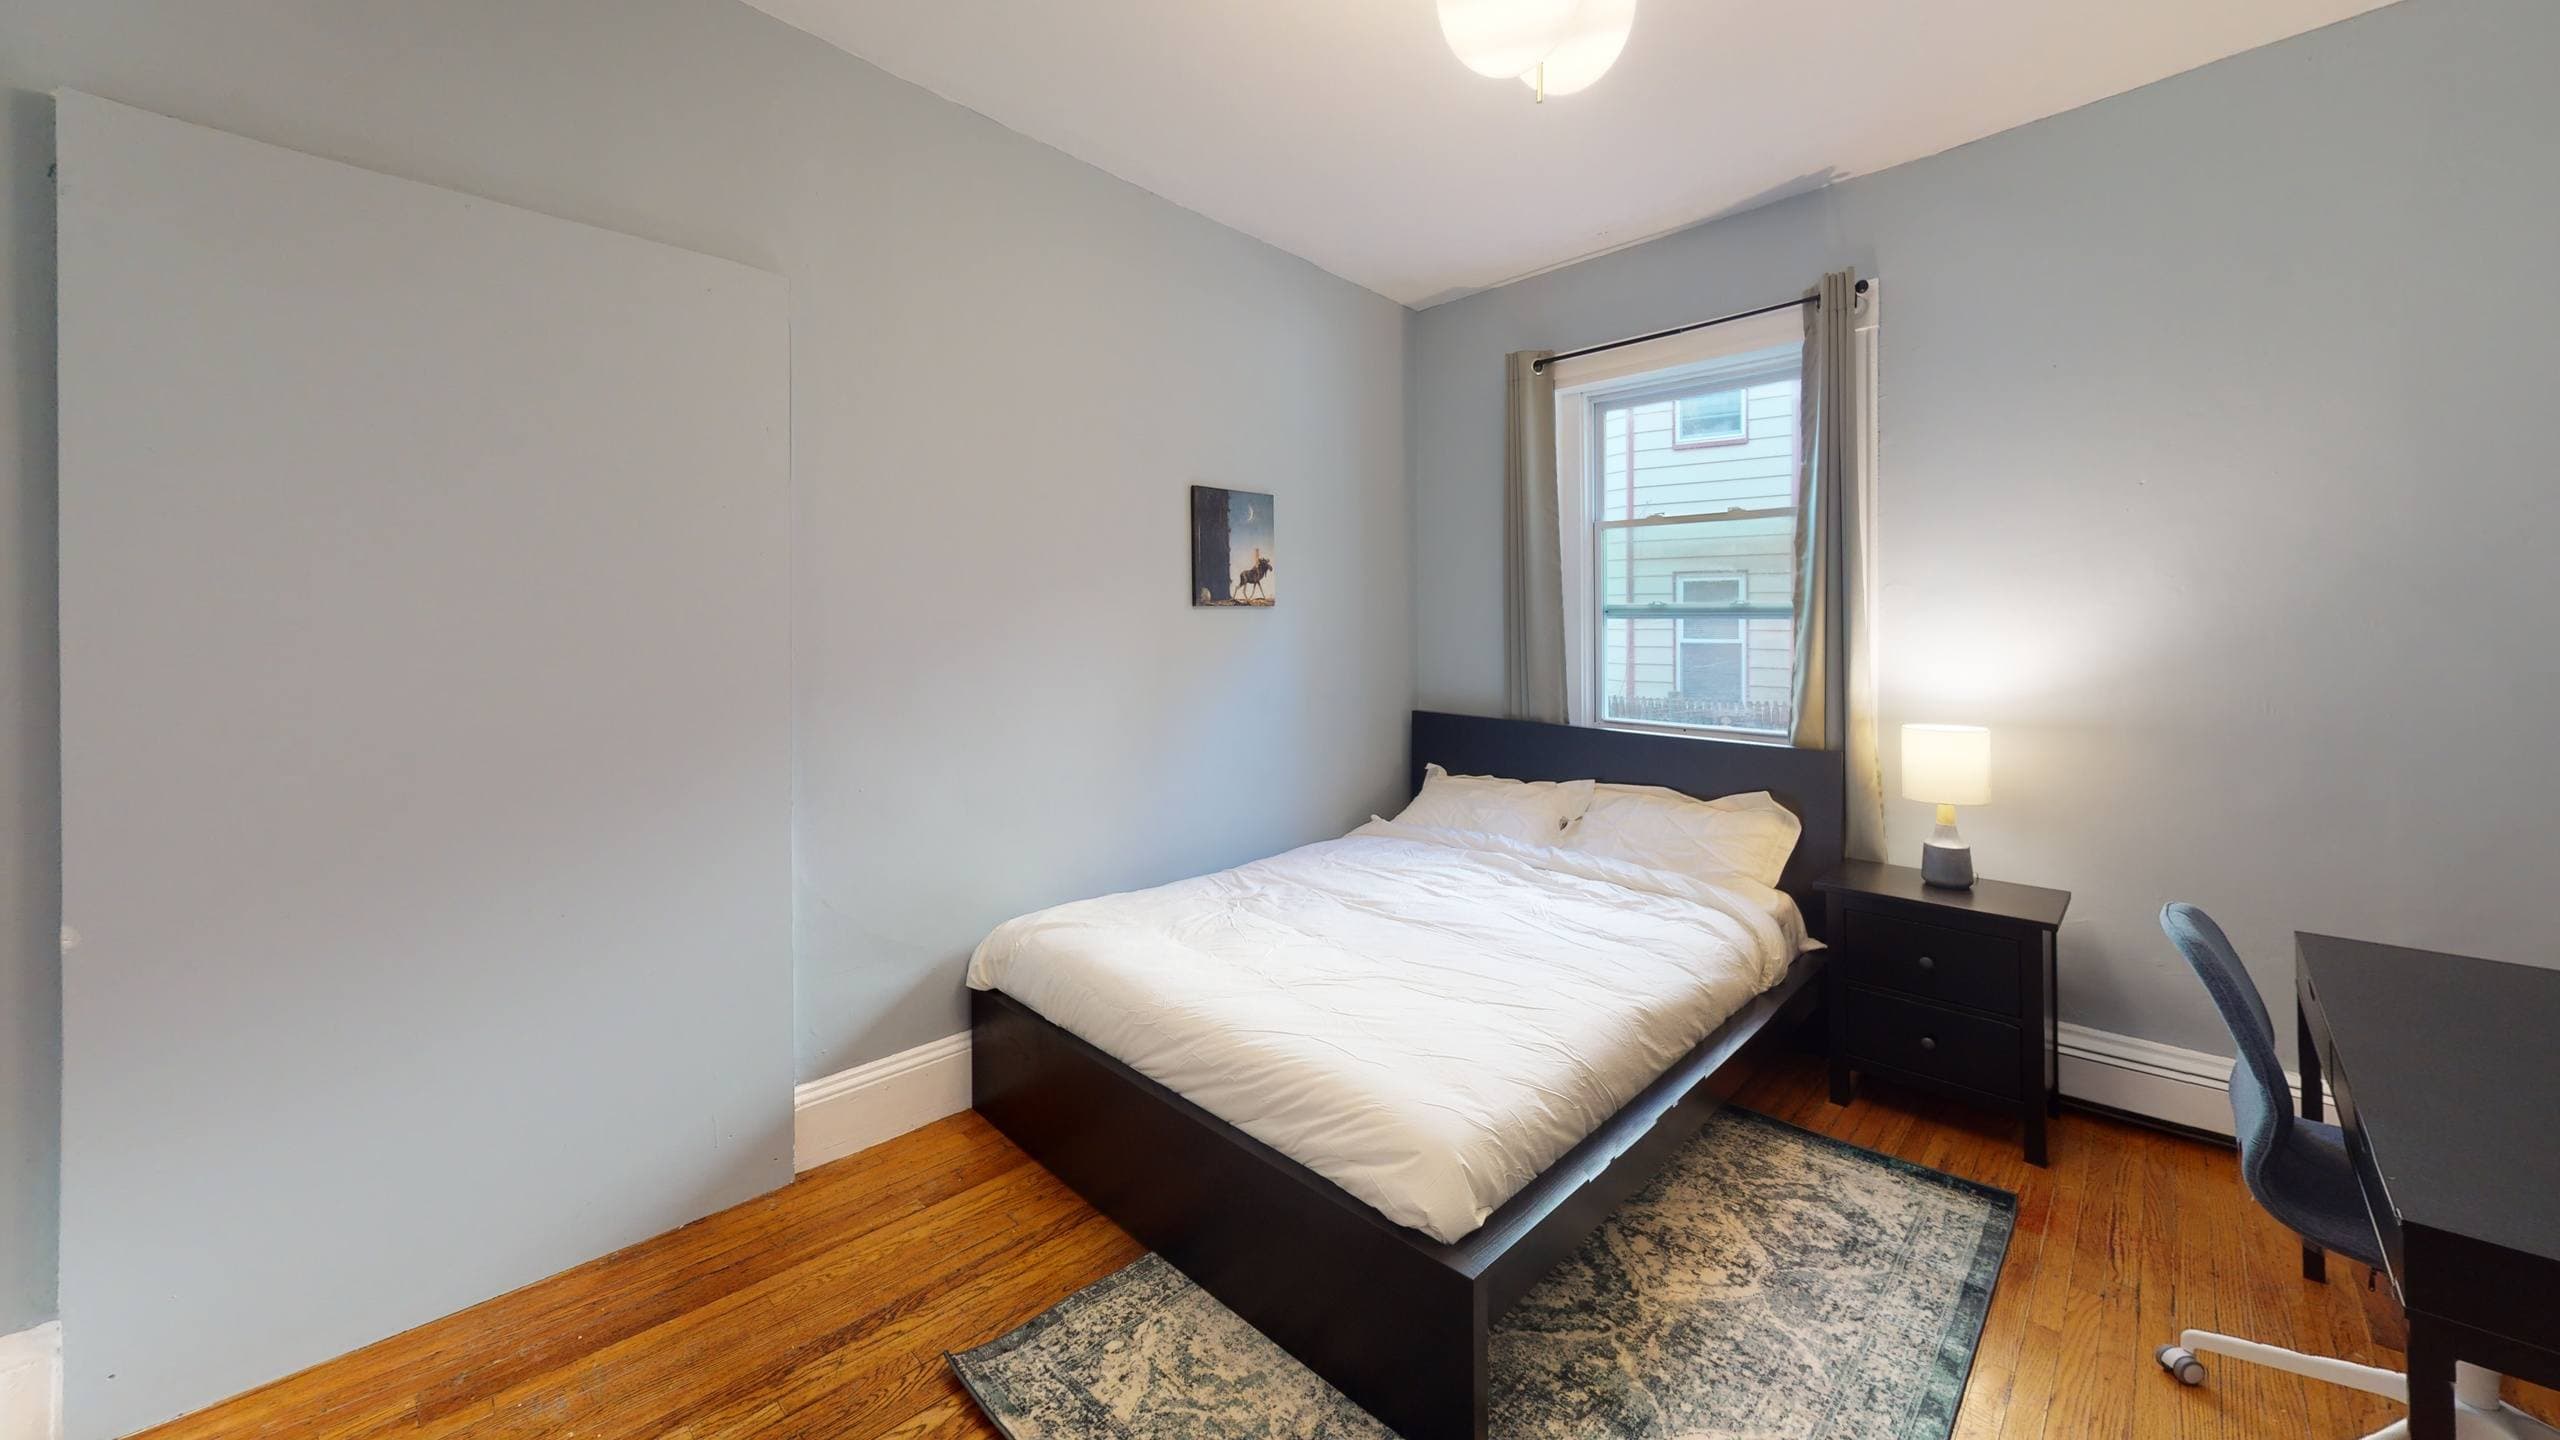 Photo 15 of #1126: Queen Bedroom A at June Homes